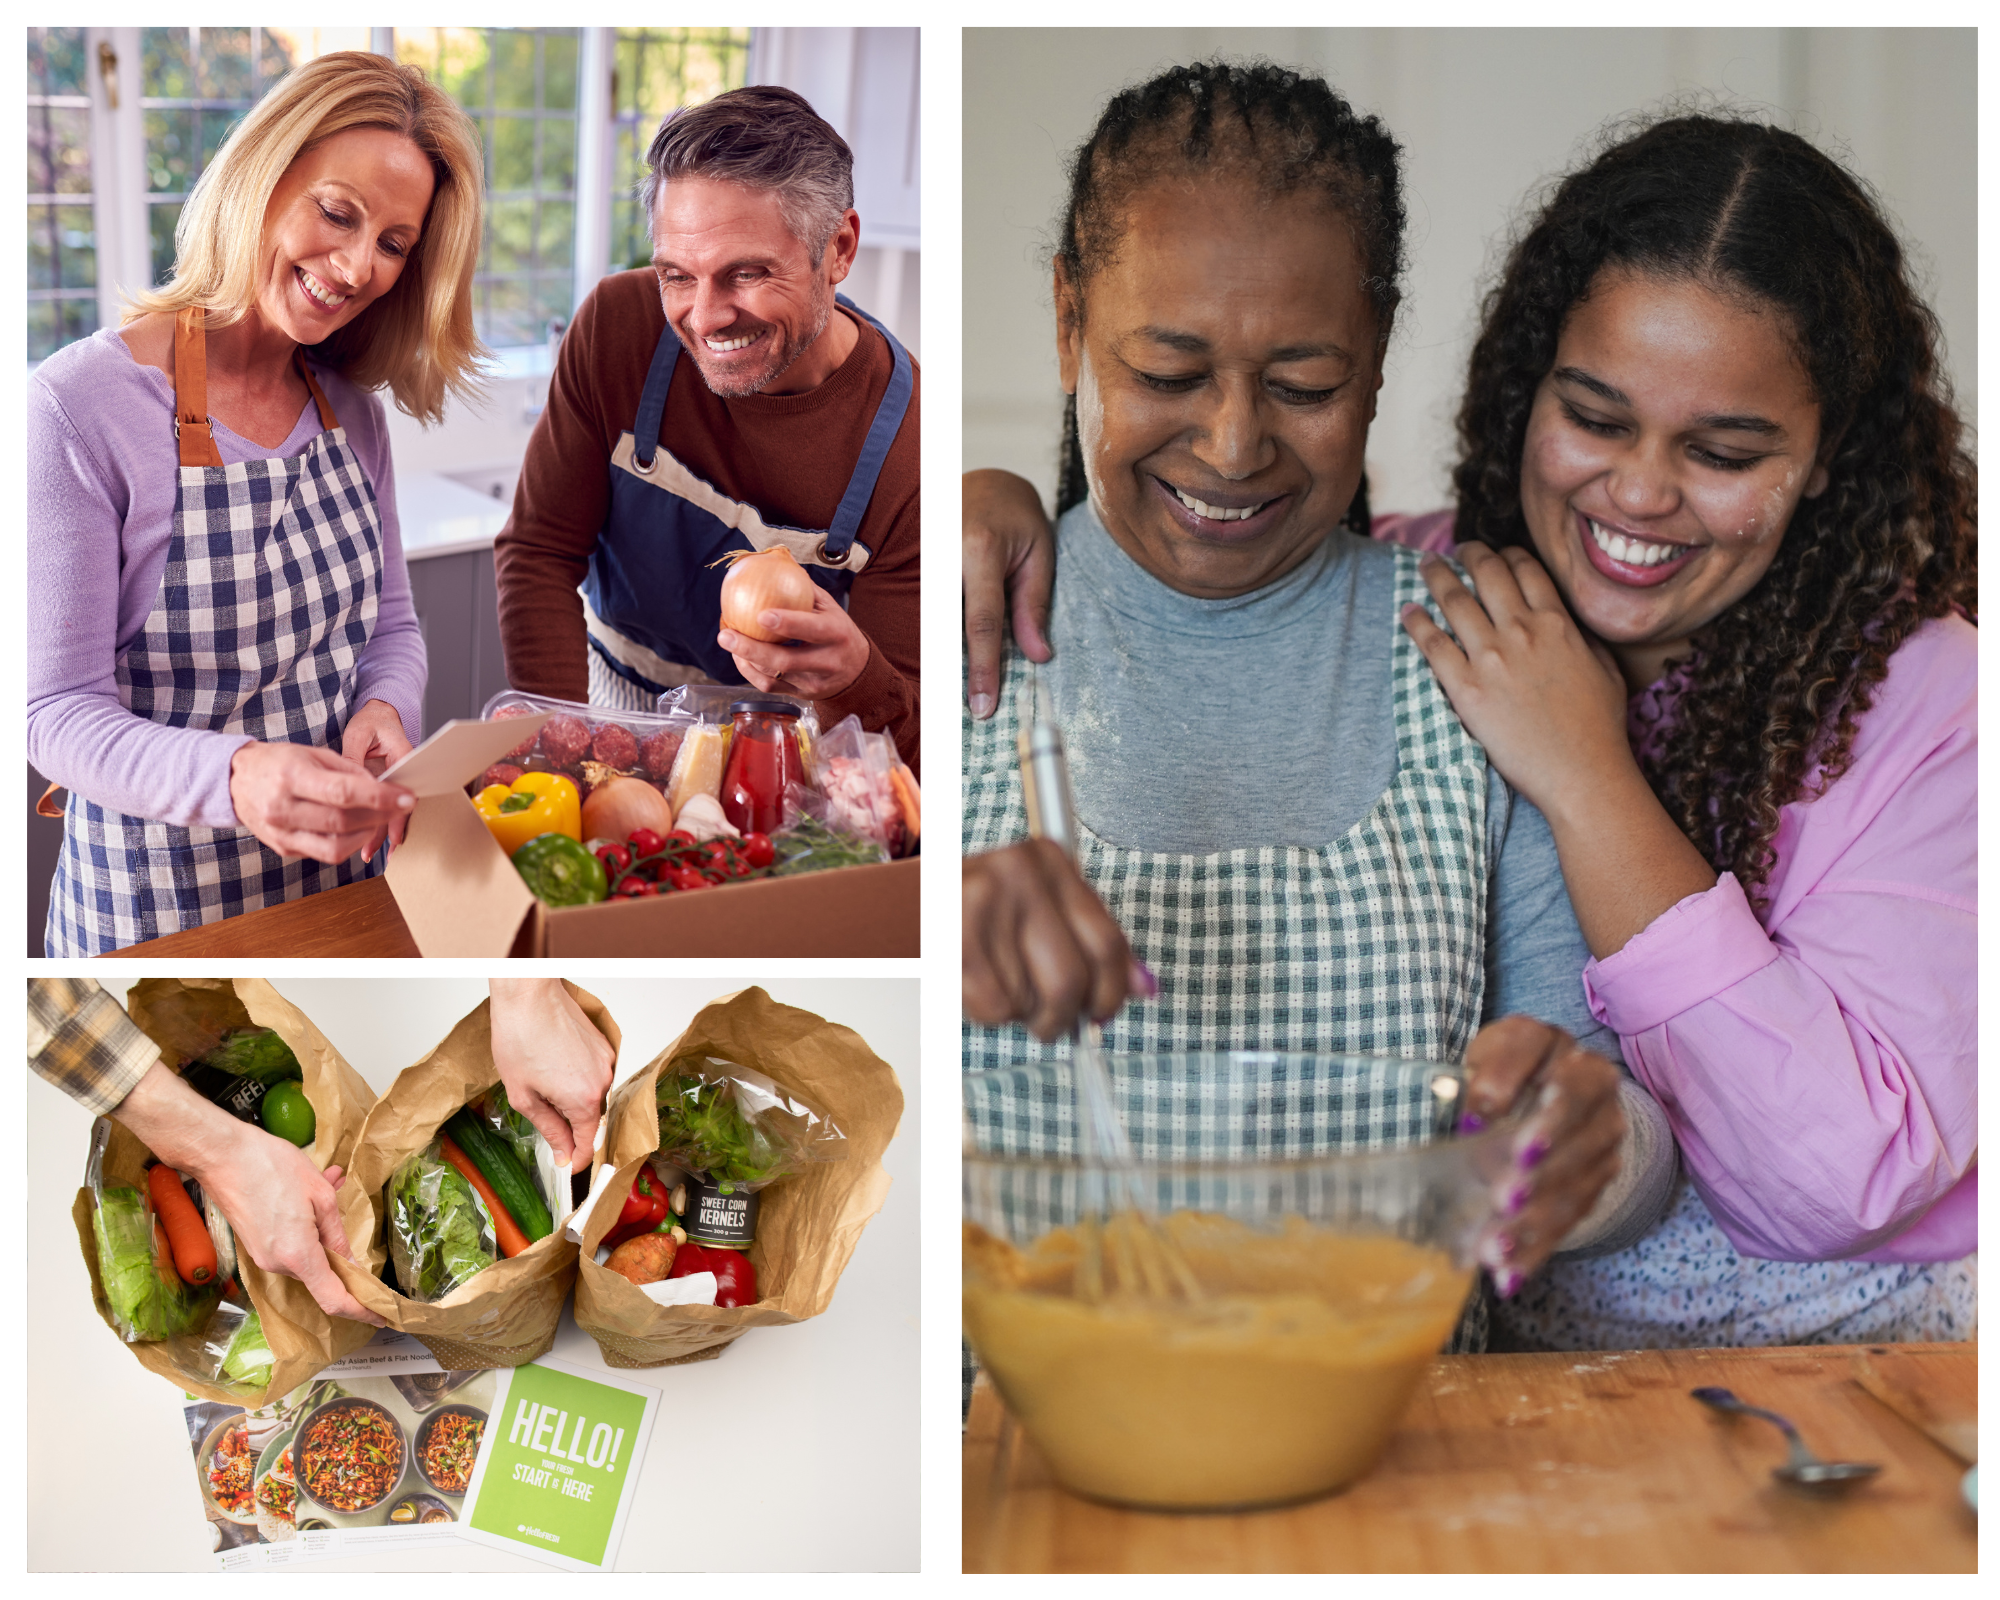 How Meal Kits Can Make Caregiving Easier